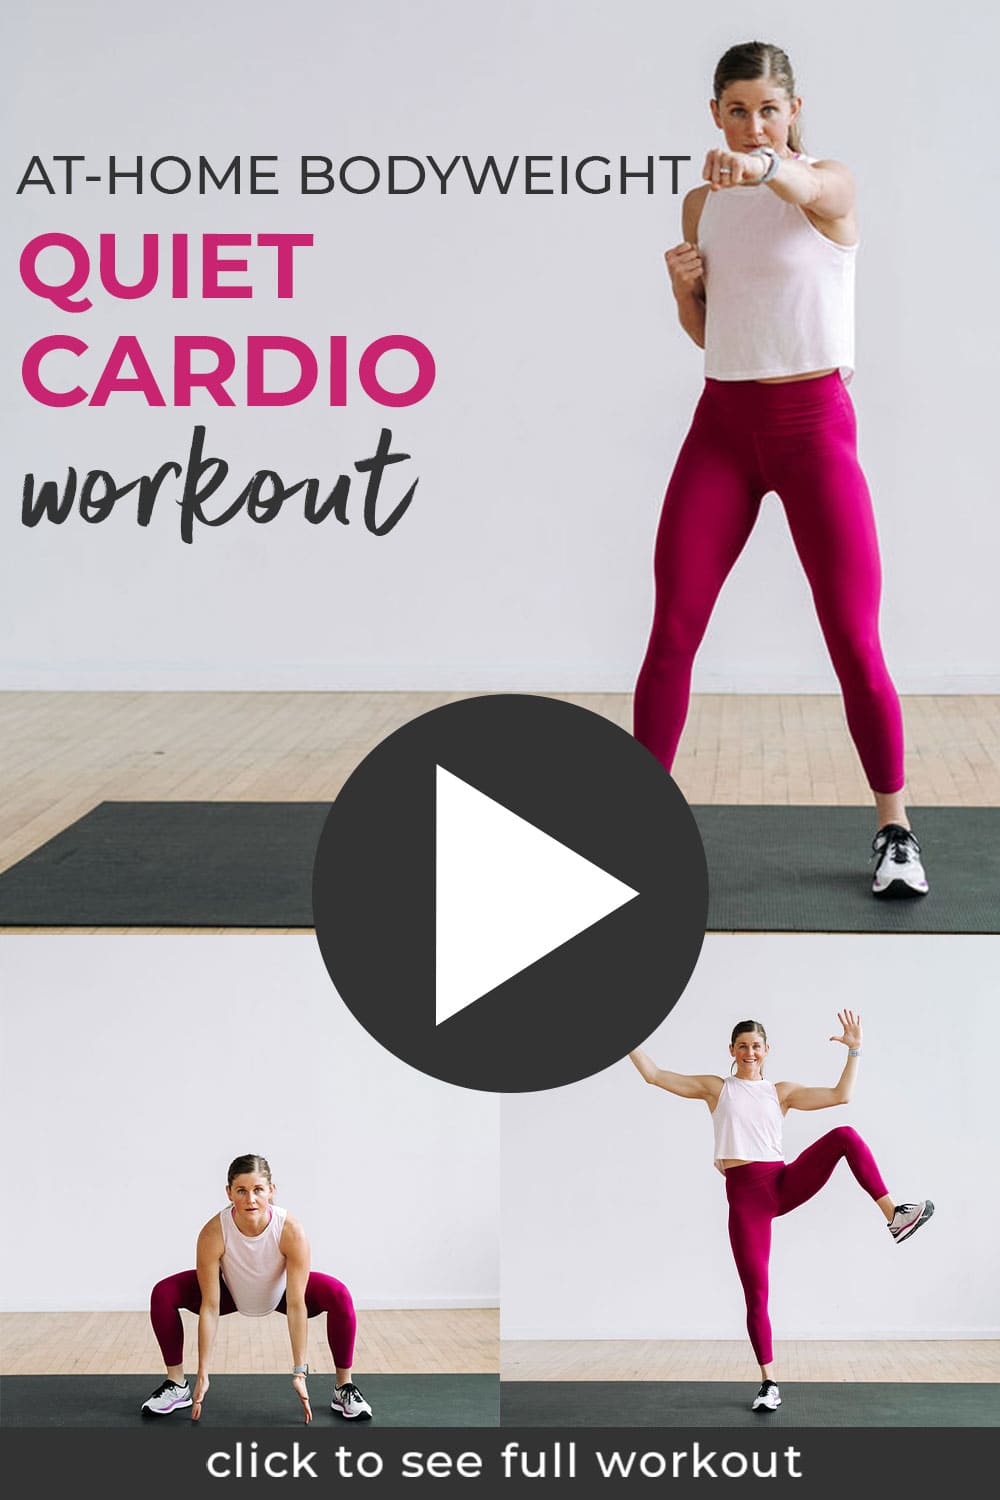  Beginner Workout Videos To Do At Home for push your ABS